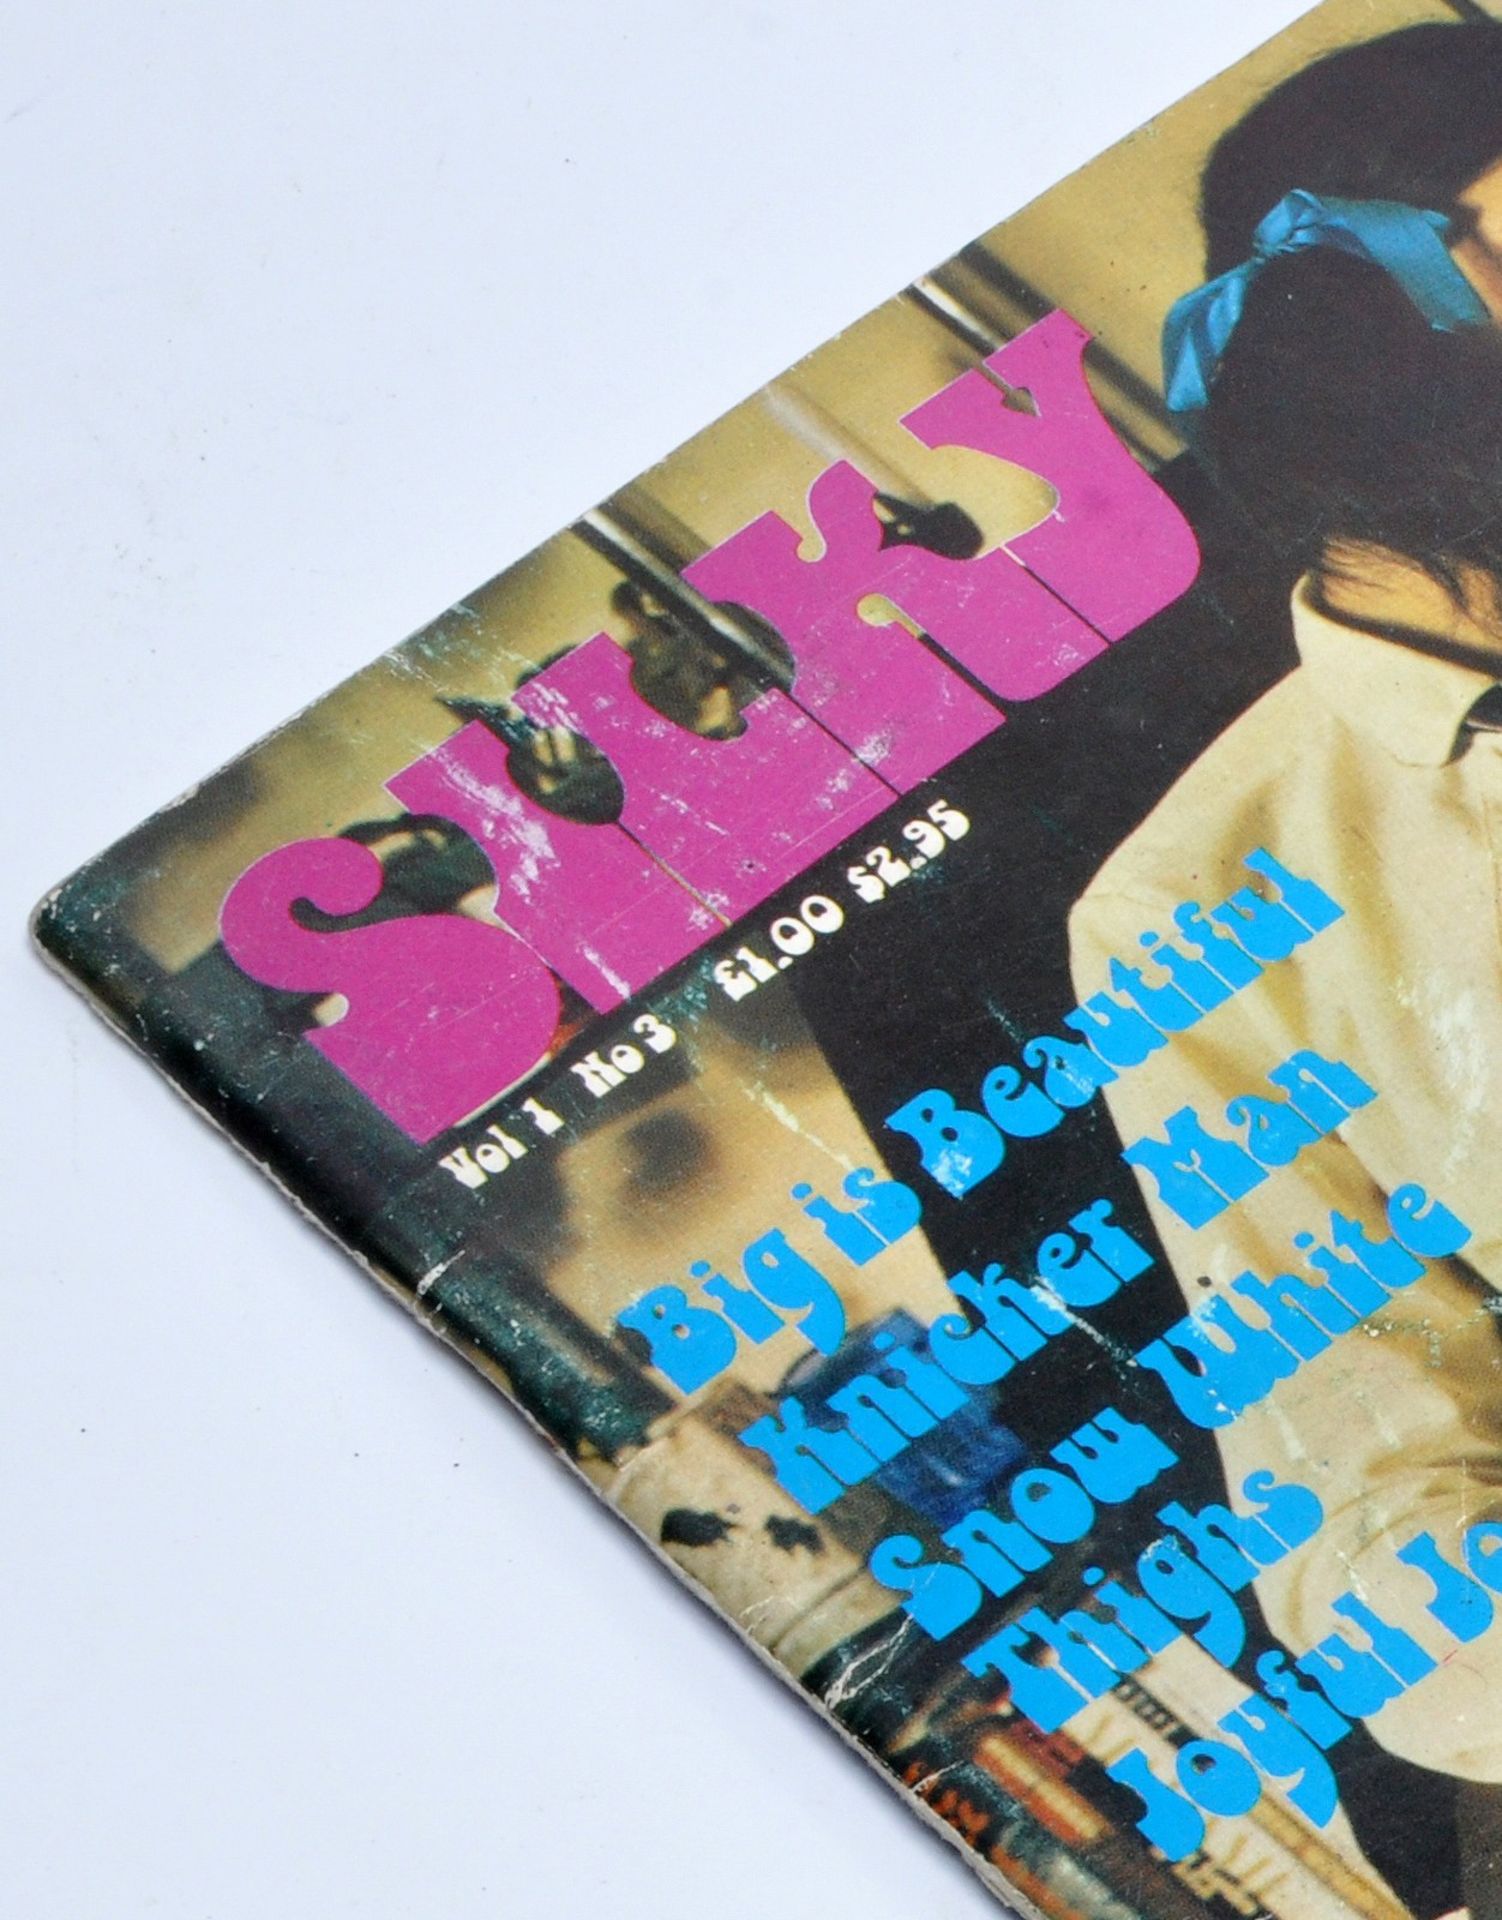 Adult Glamour Magazine / Vintage Erotica, comprising single issue of Silky, V1#3. Please note